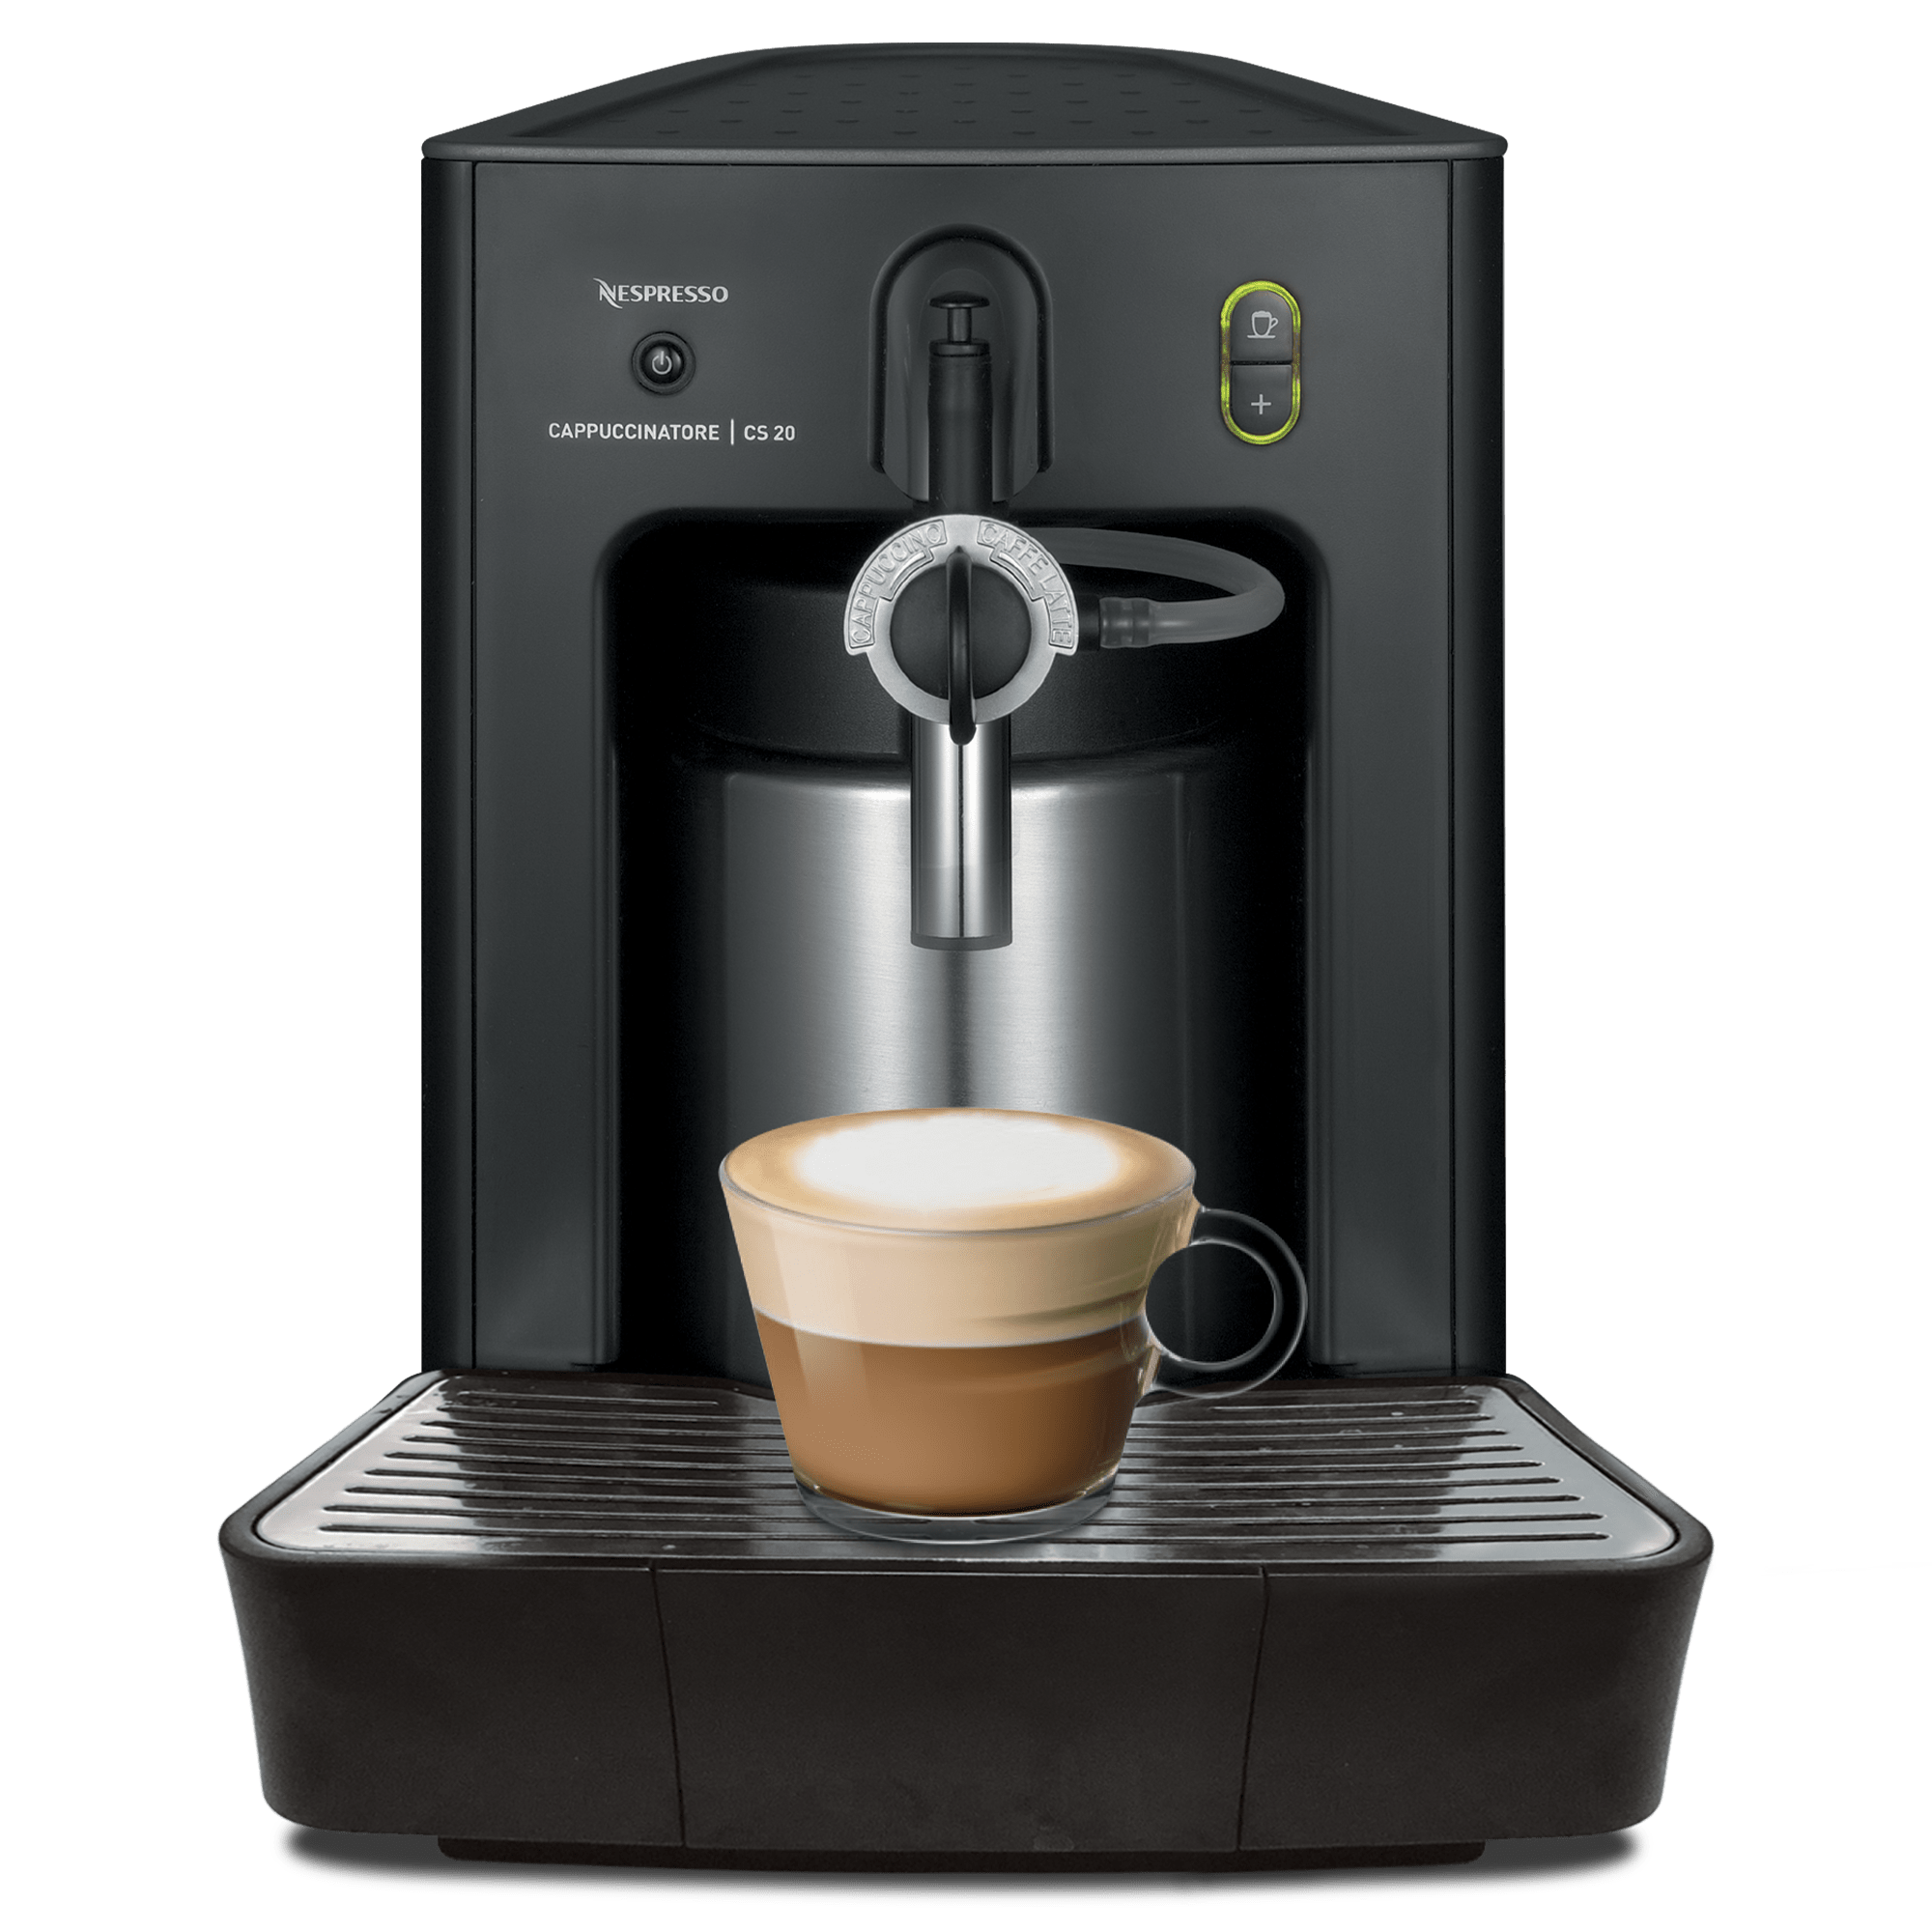 Cappuccinatore, Standalone Milk Frother